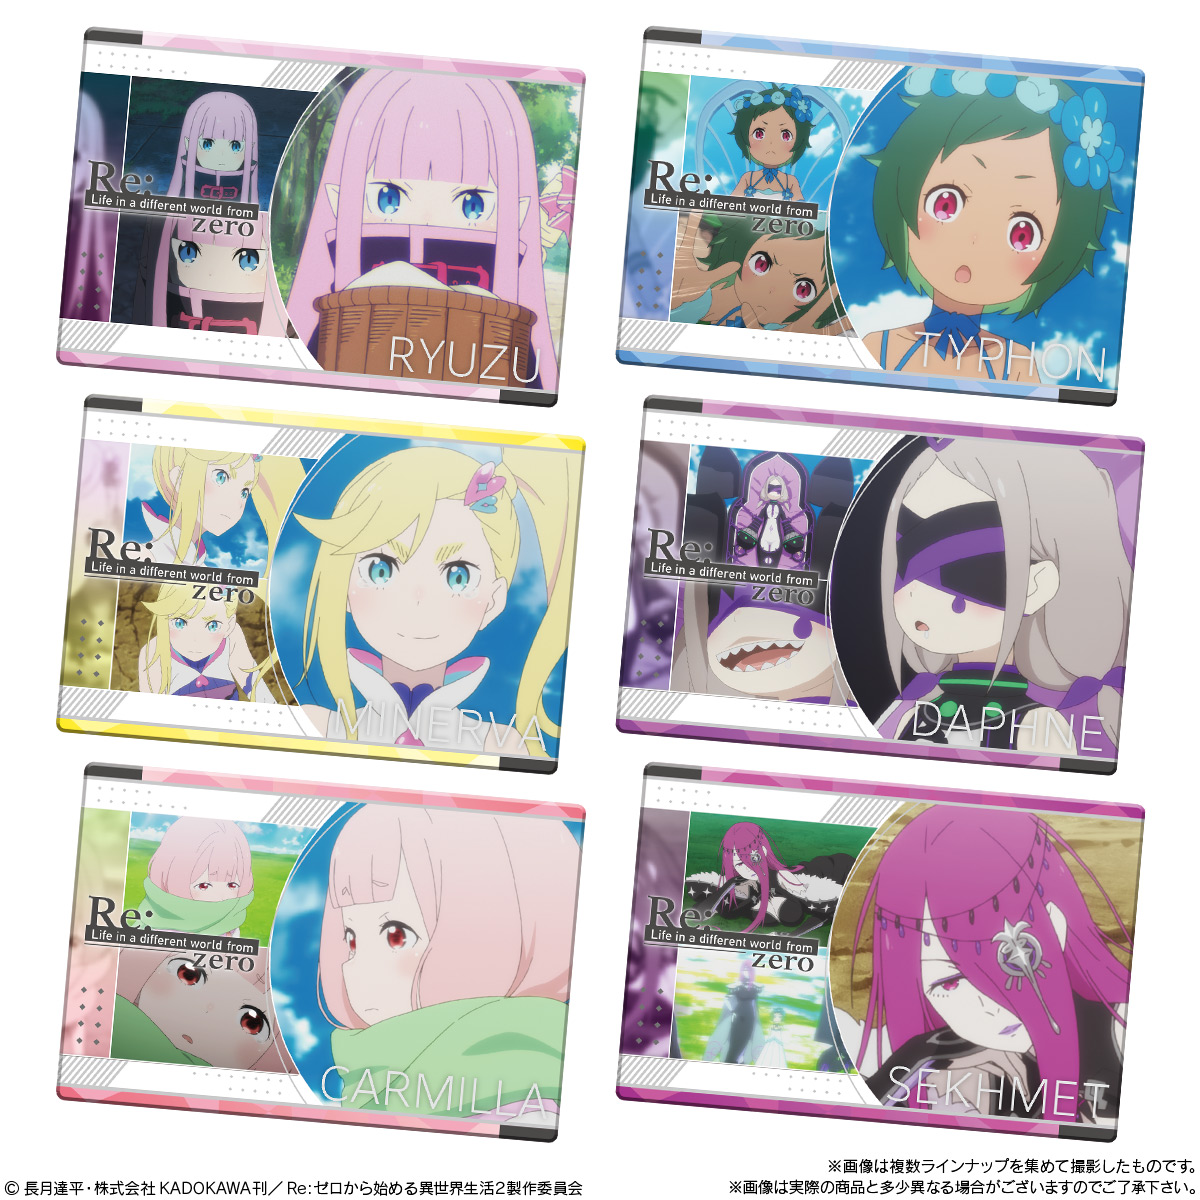 Wafer Cards Limited style Re: Life in a different world from zero Candy Toy BANDAI